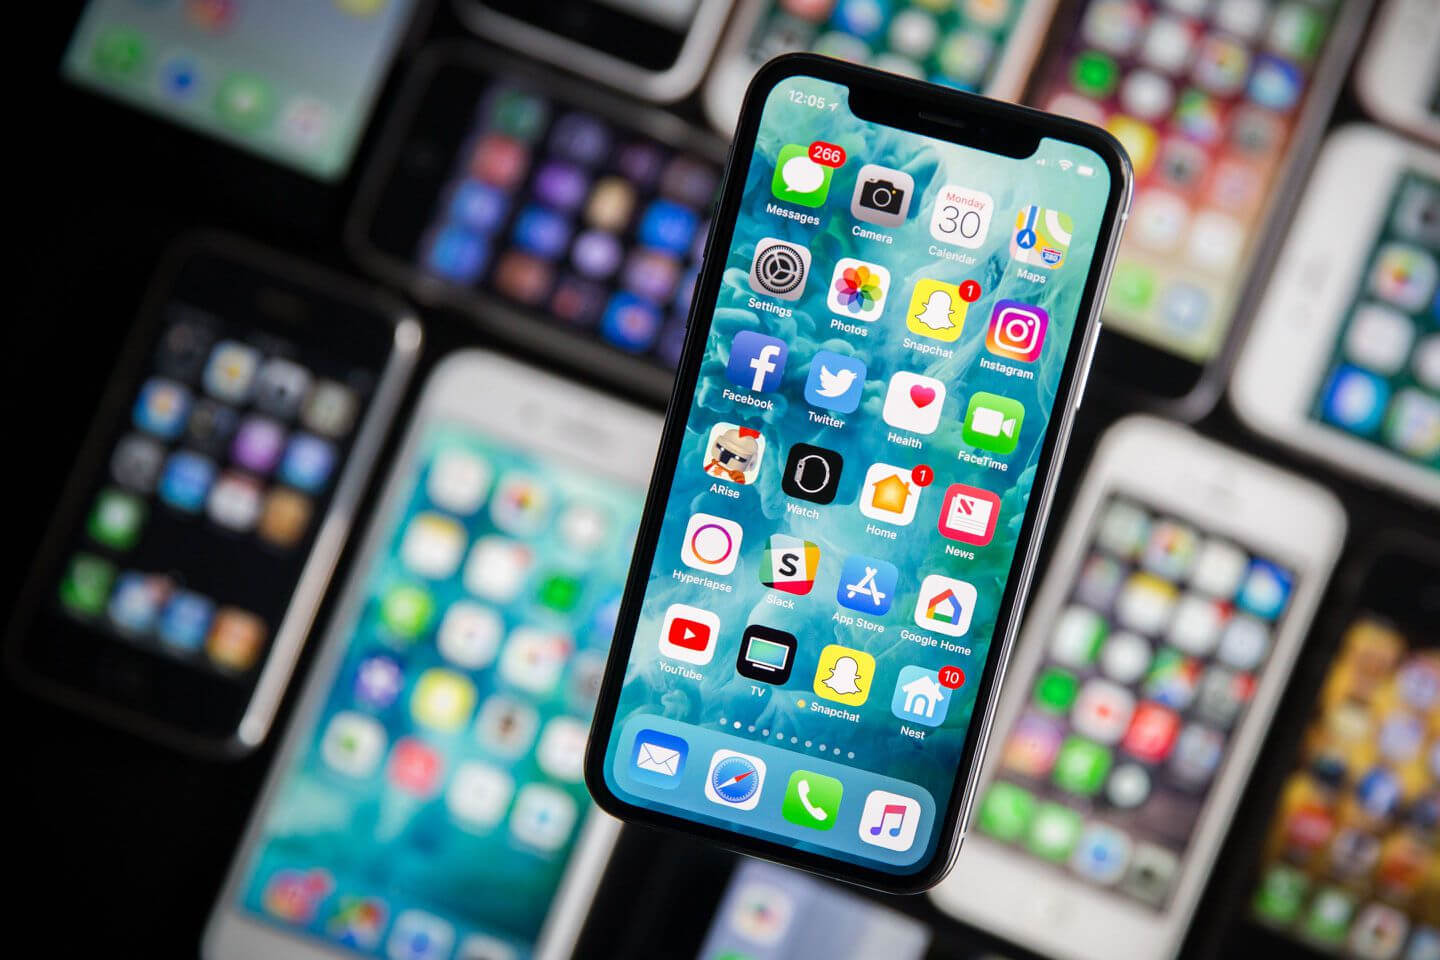 DisplayMate says the iPhone X has the best smartphone display ever tested